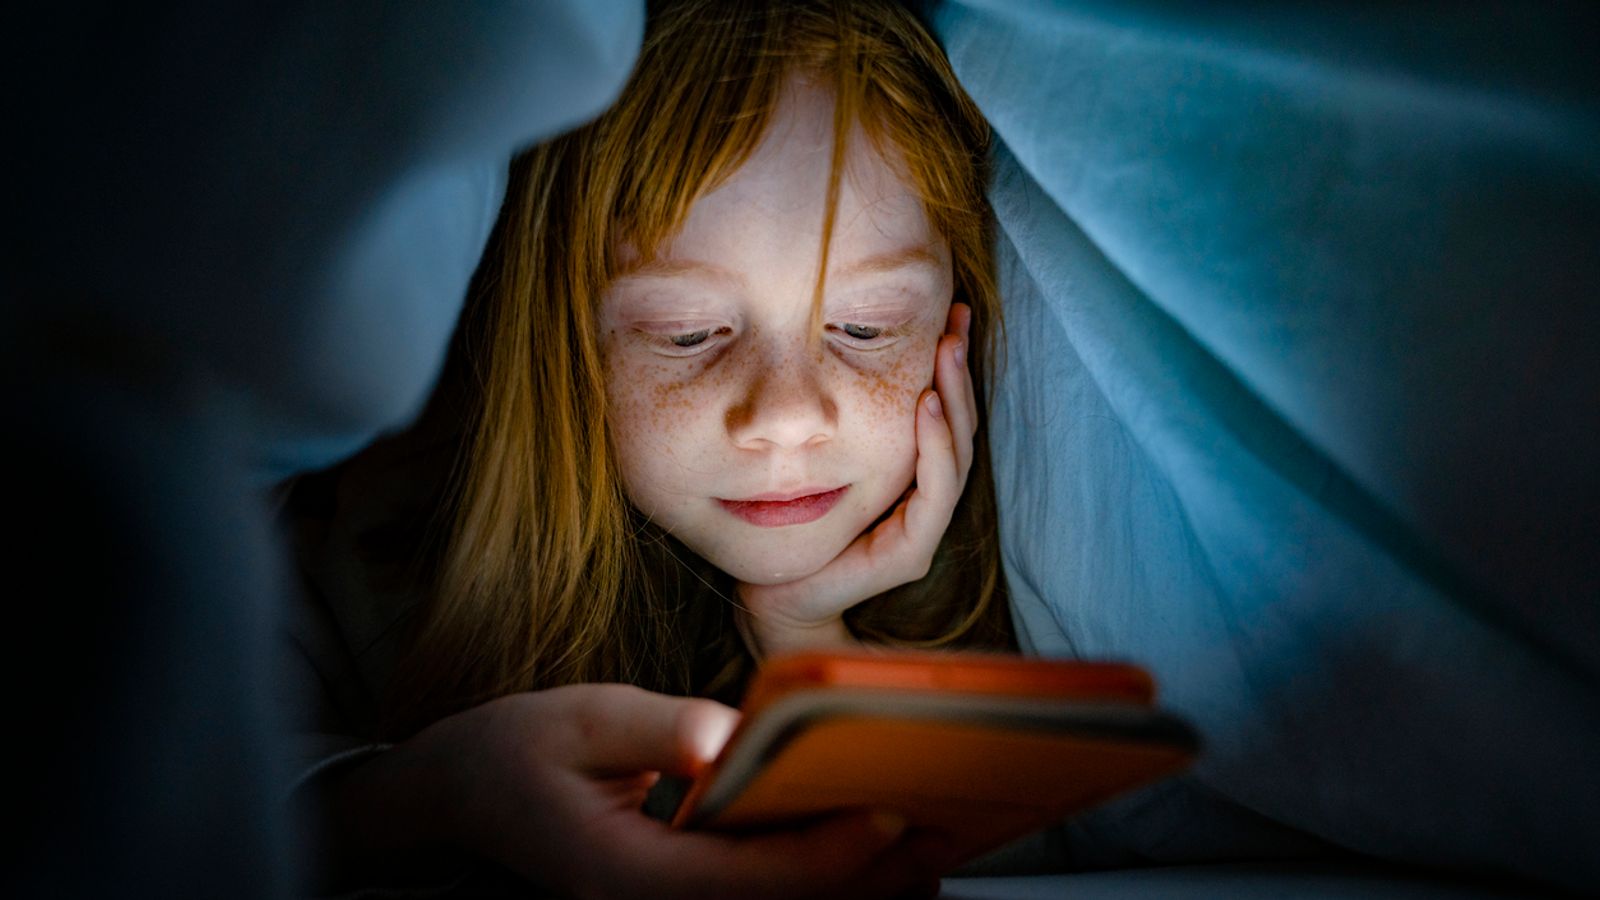 The Rise of Split-Screening: How Children are Consuming Social Media Content